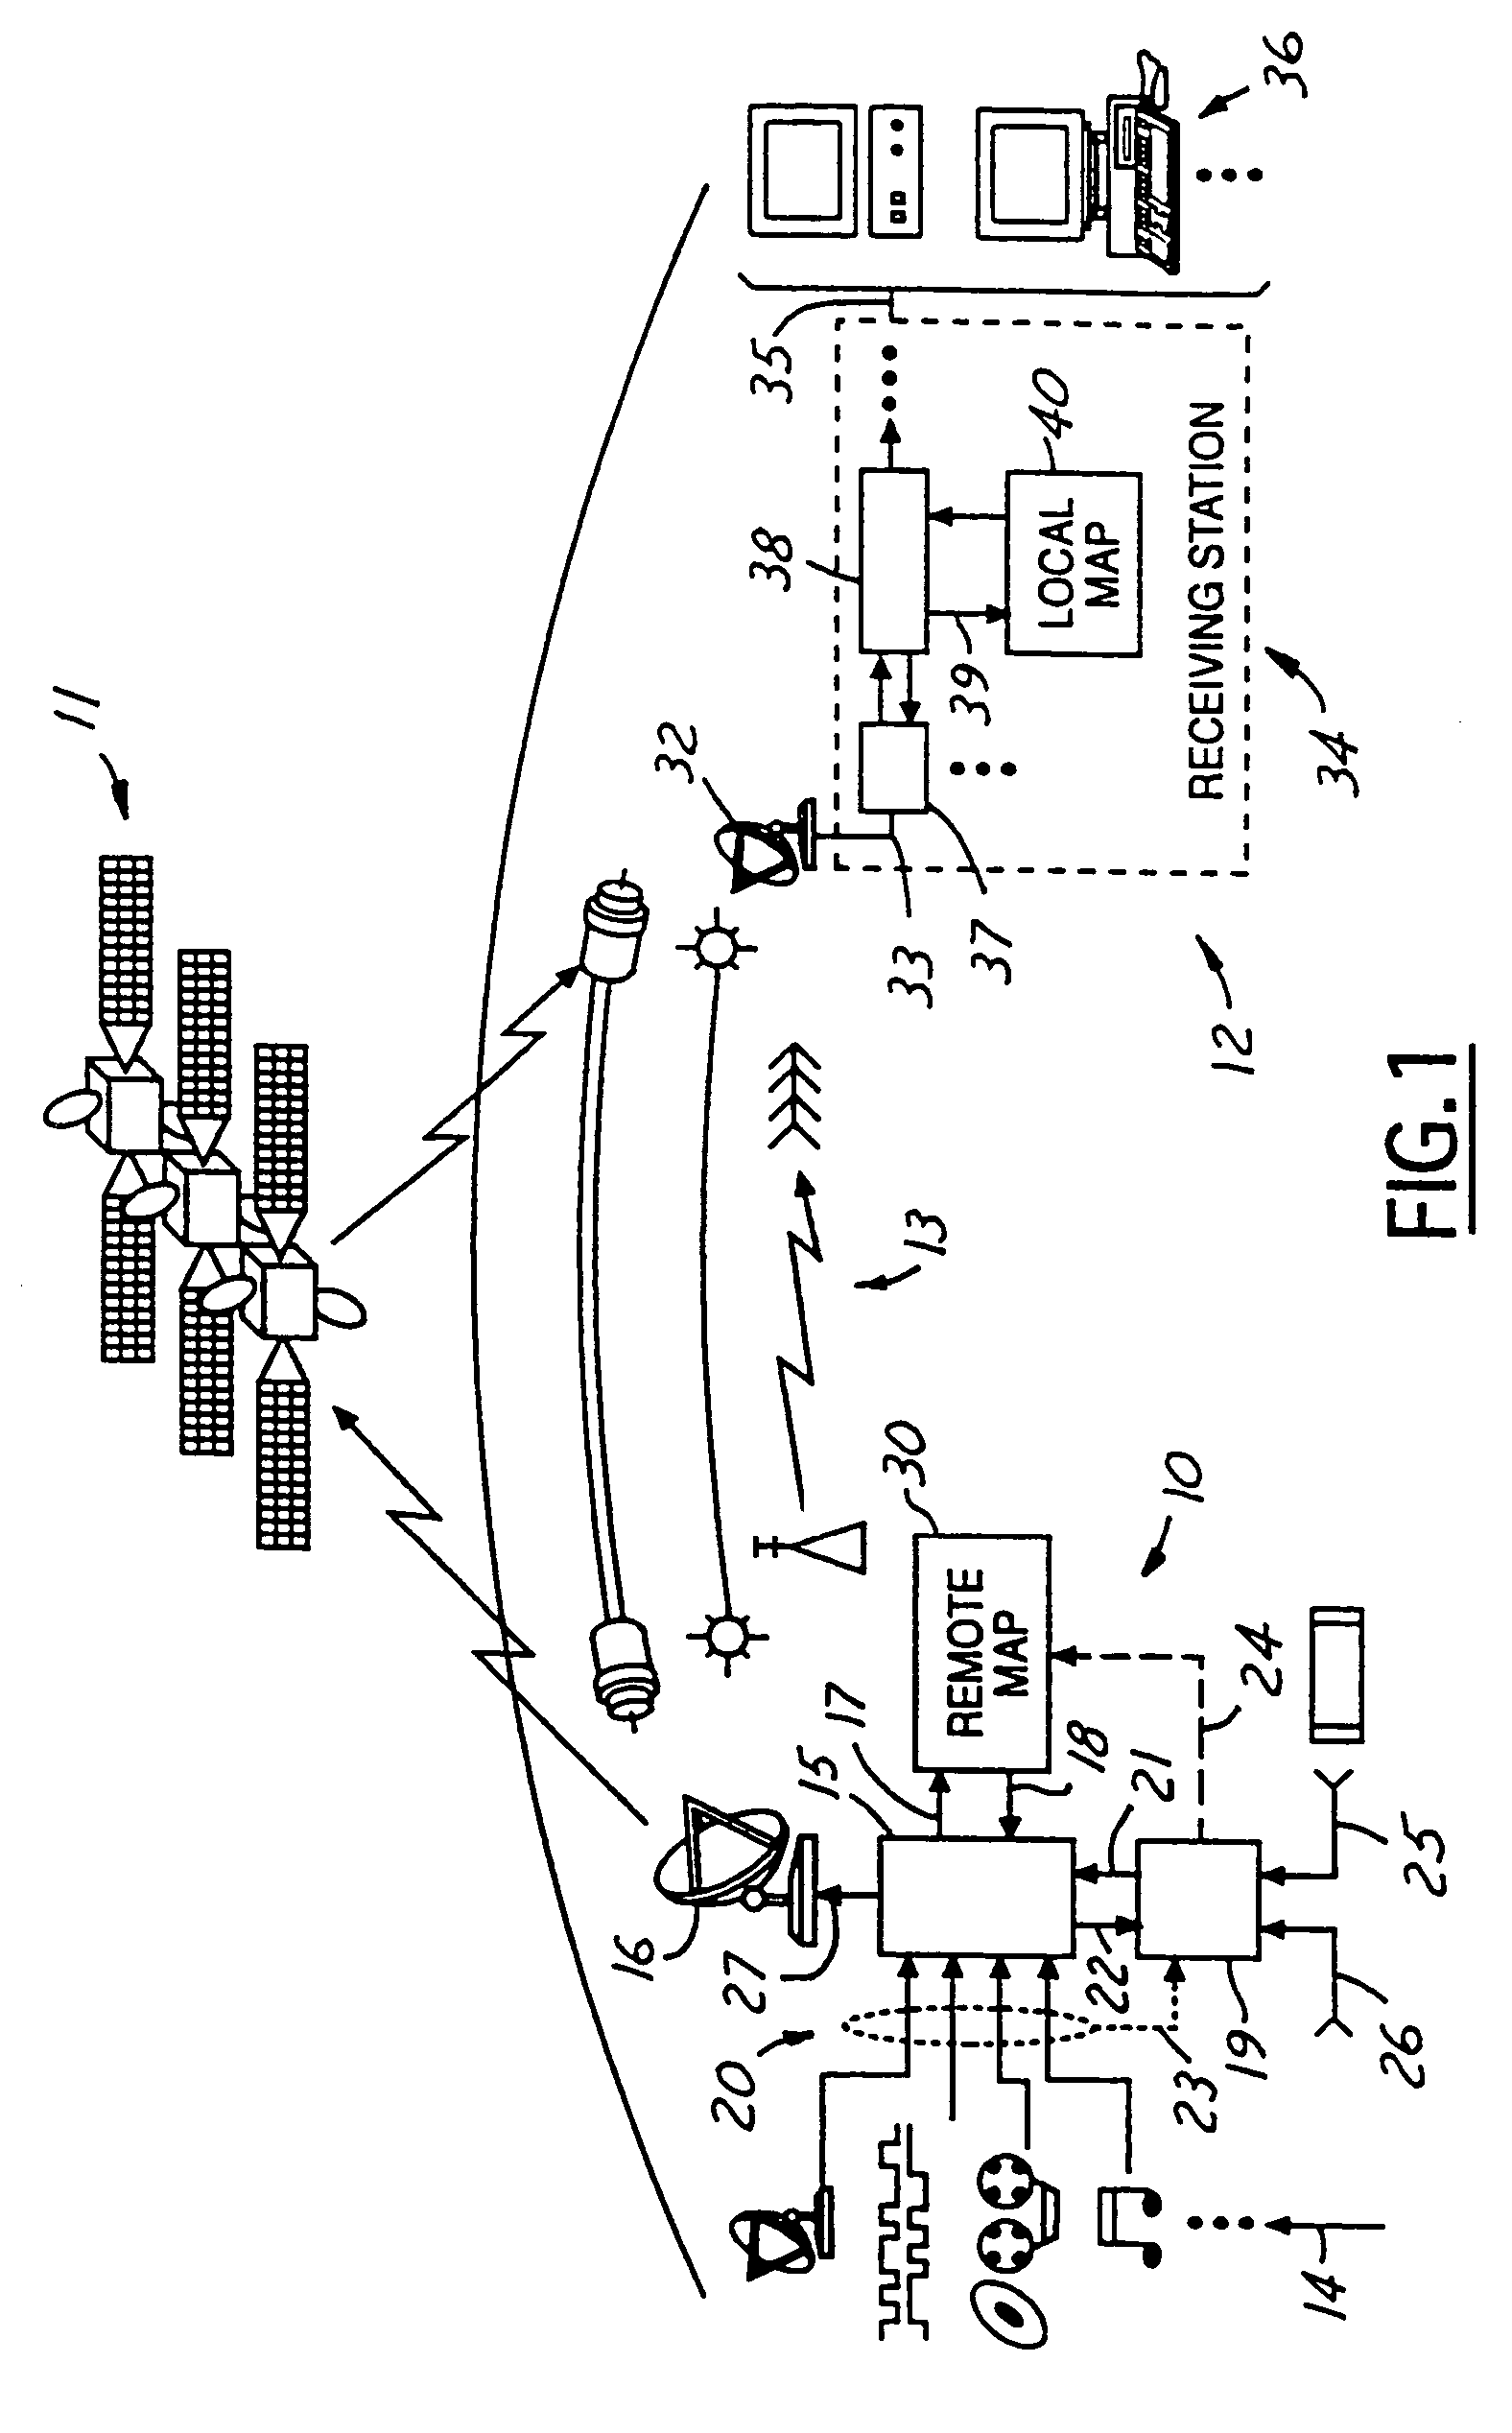 Device and method for efficient delivery of redundant national television signals